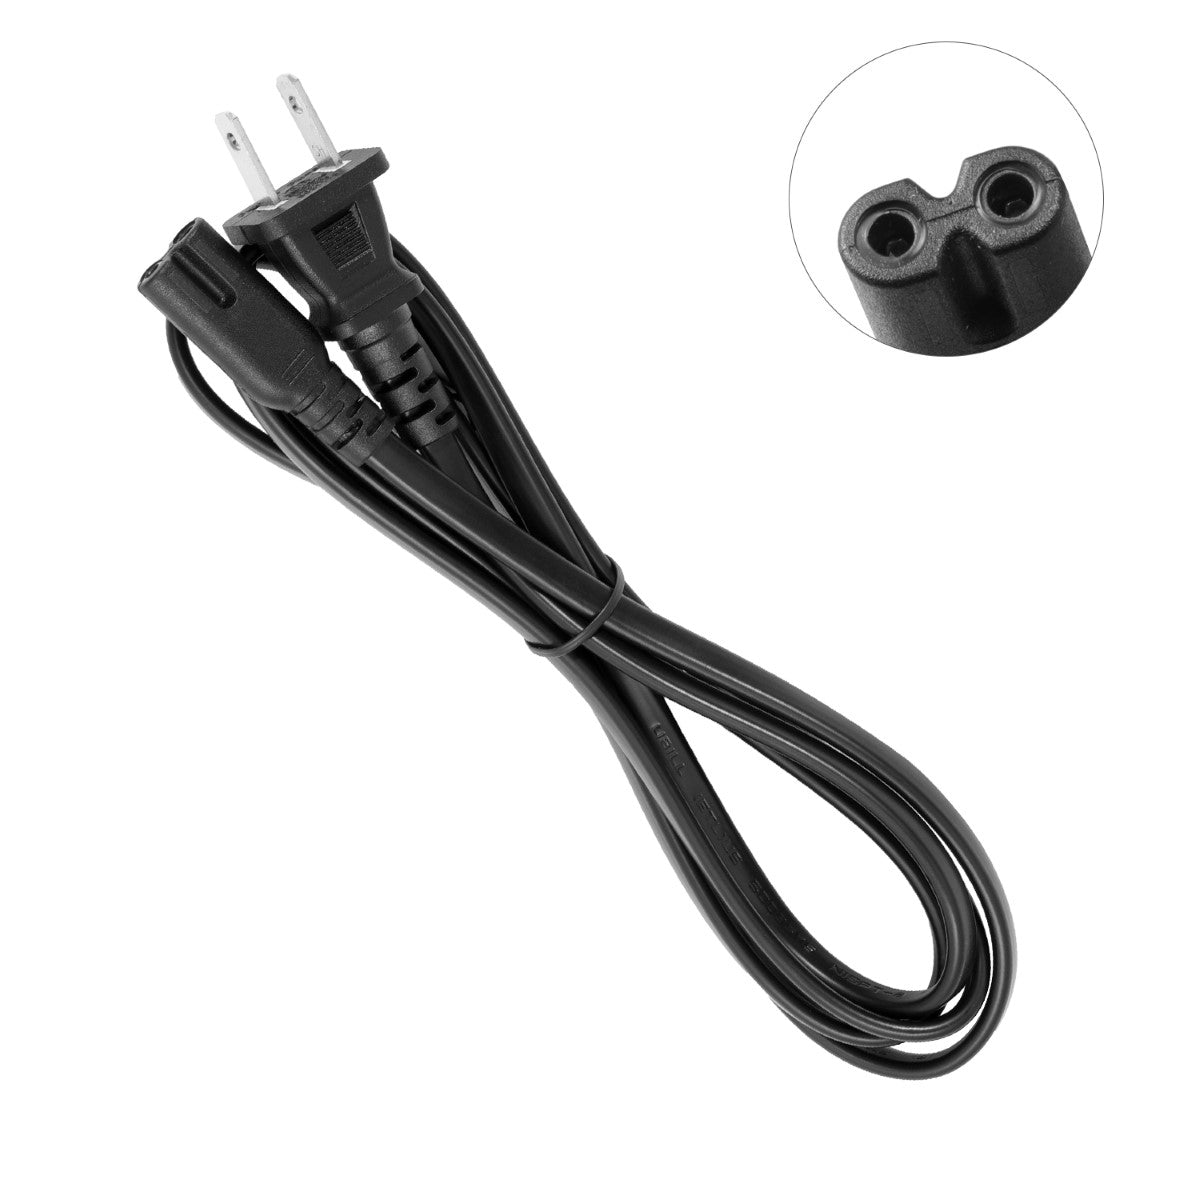 Power Cord for HP ENVY 4523 e-All-in-One Printer.